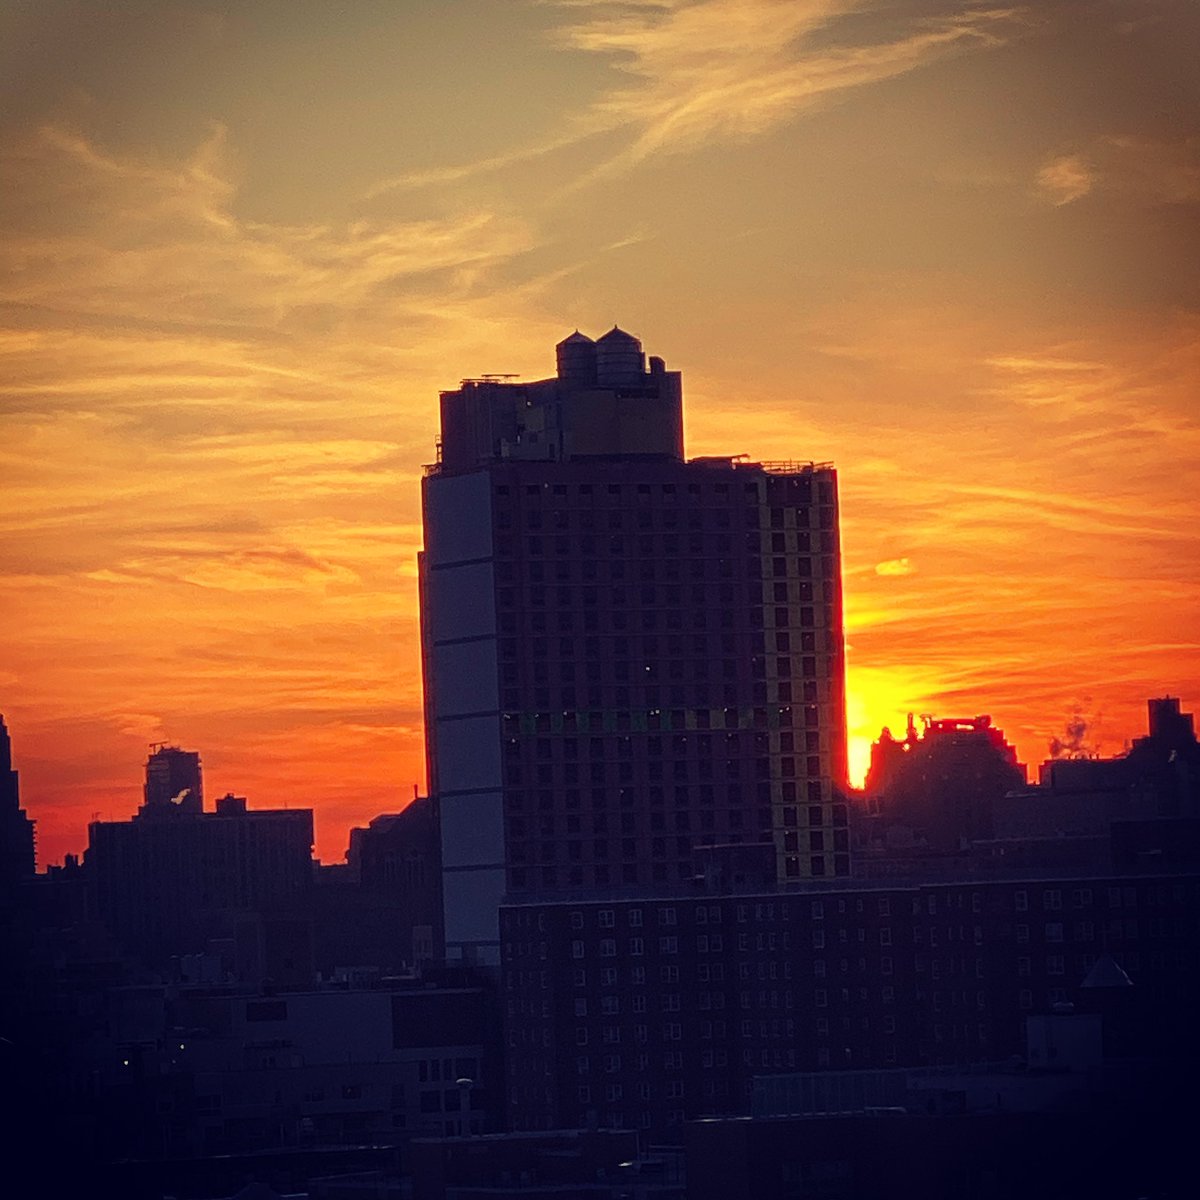 Always love my views. View from the top. Sunsets at their best. A New York City sunset #NYC #nycstreetart #sunset #streetphotography #instastreet #skyline #views 📸: @jameiseharris